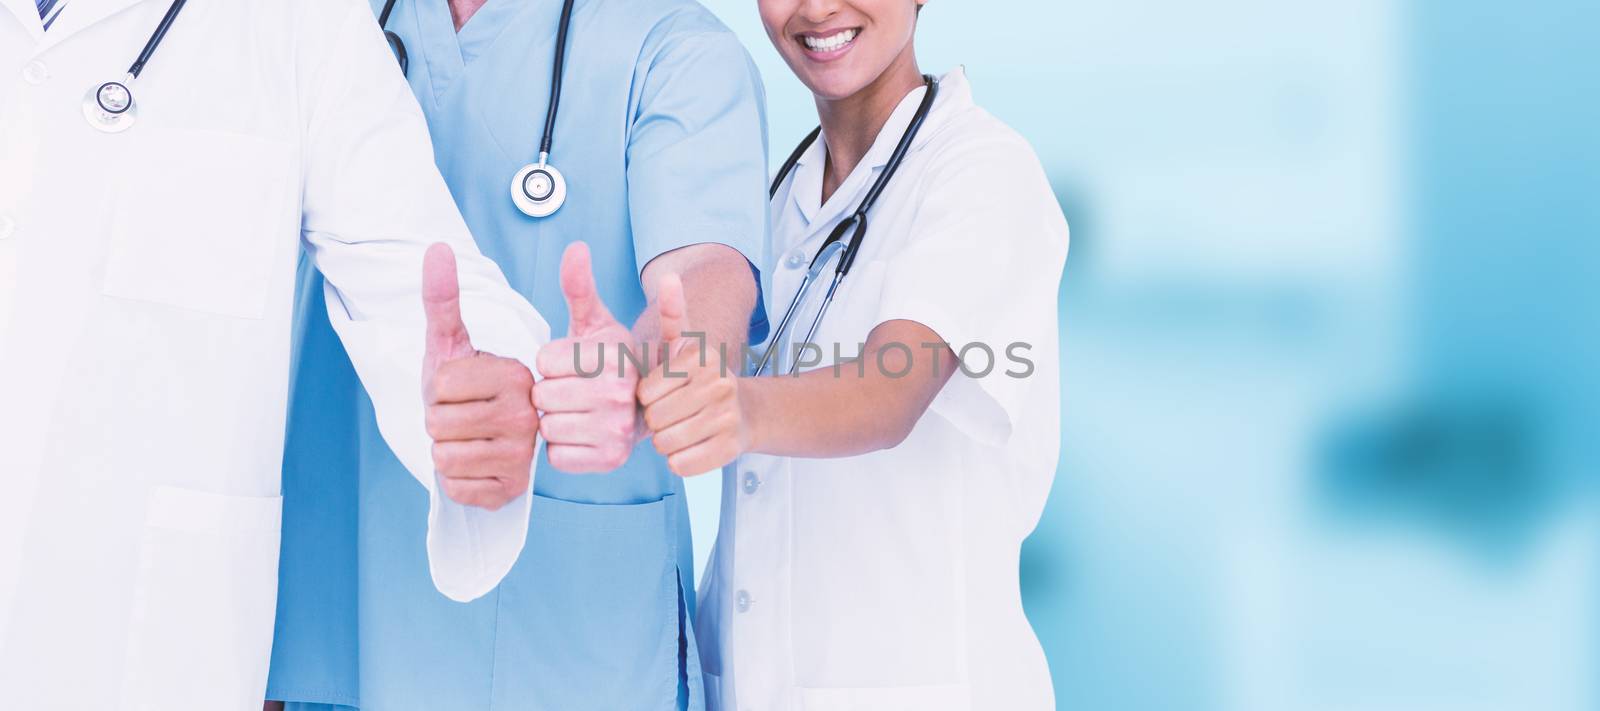 Composite image of portrait of smiling doctors with thumbs up by Wavebreakmedia